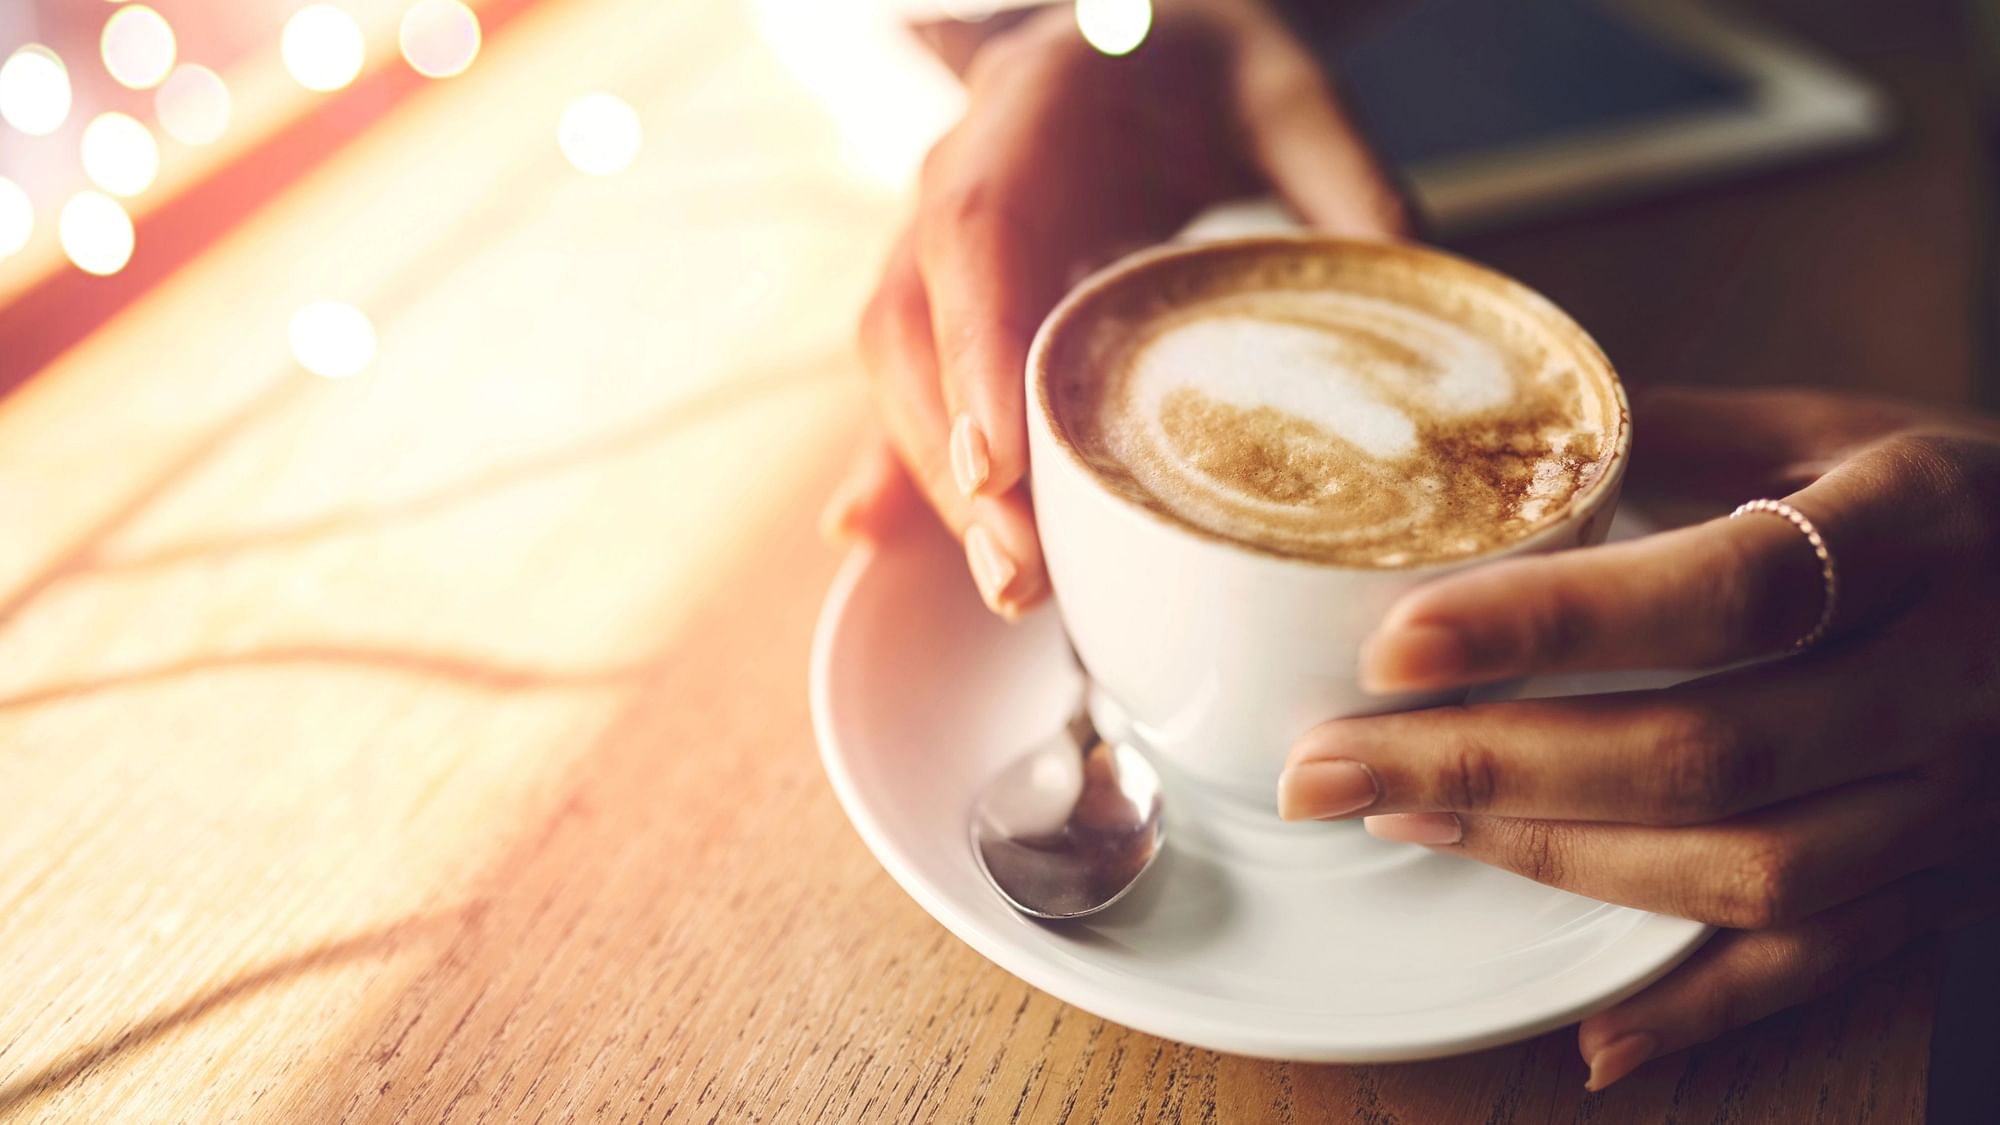 Coffee drinkers were 50 percent less likely to develop HCC, the most common type of liver cancer.